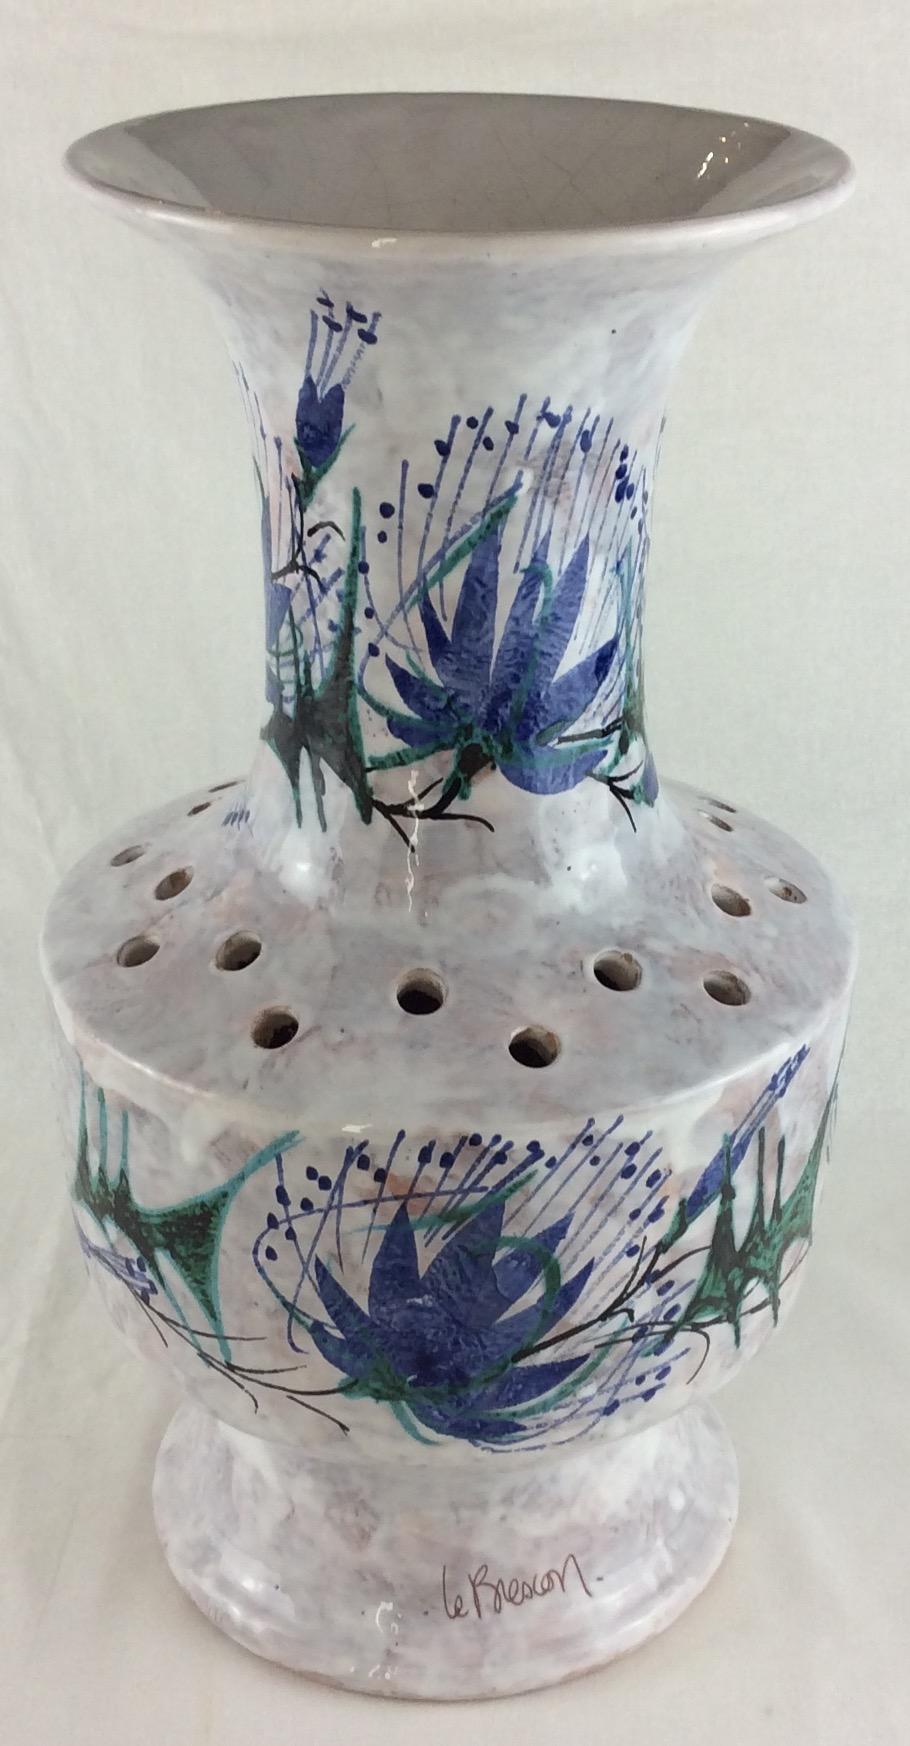 A fine midcentury vase from Vallauris, France signed Le Brescon.
Handcrafted with great precision. The white background is adorned with multicolored flowers and other interesting images, predominantly blue making this piece very pleasing to the